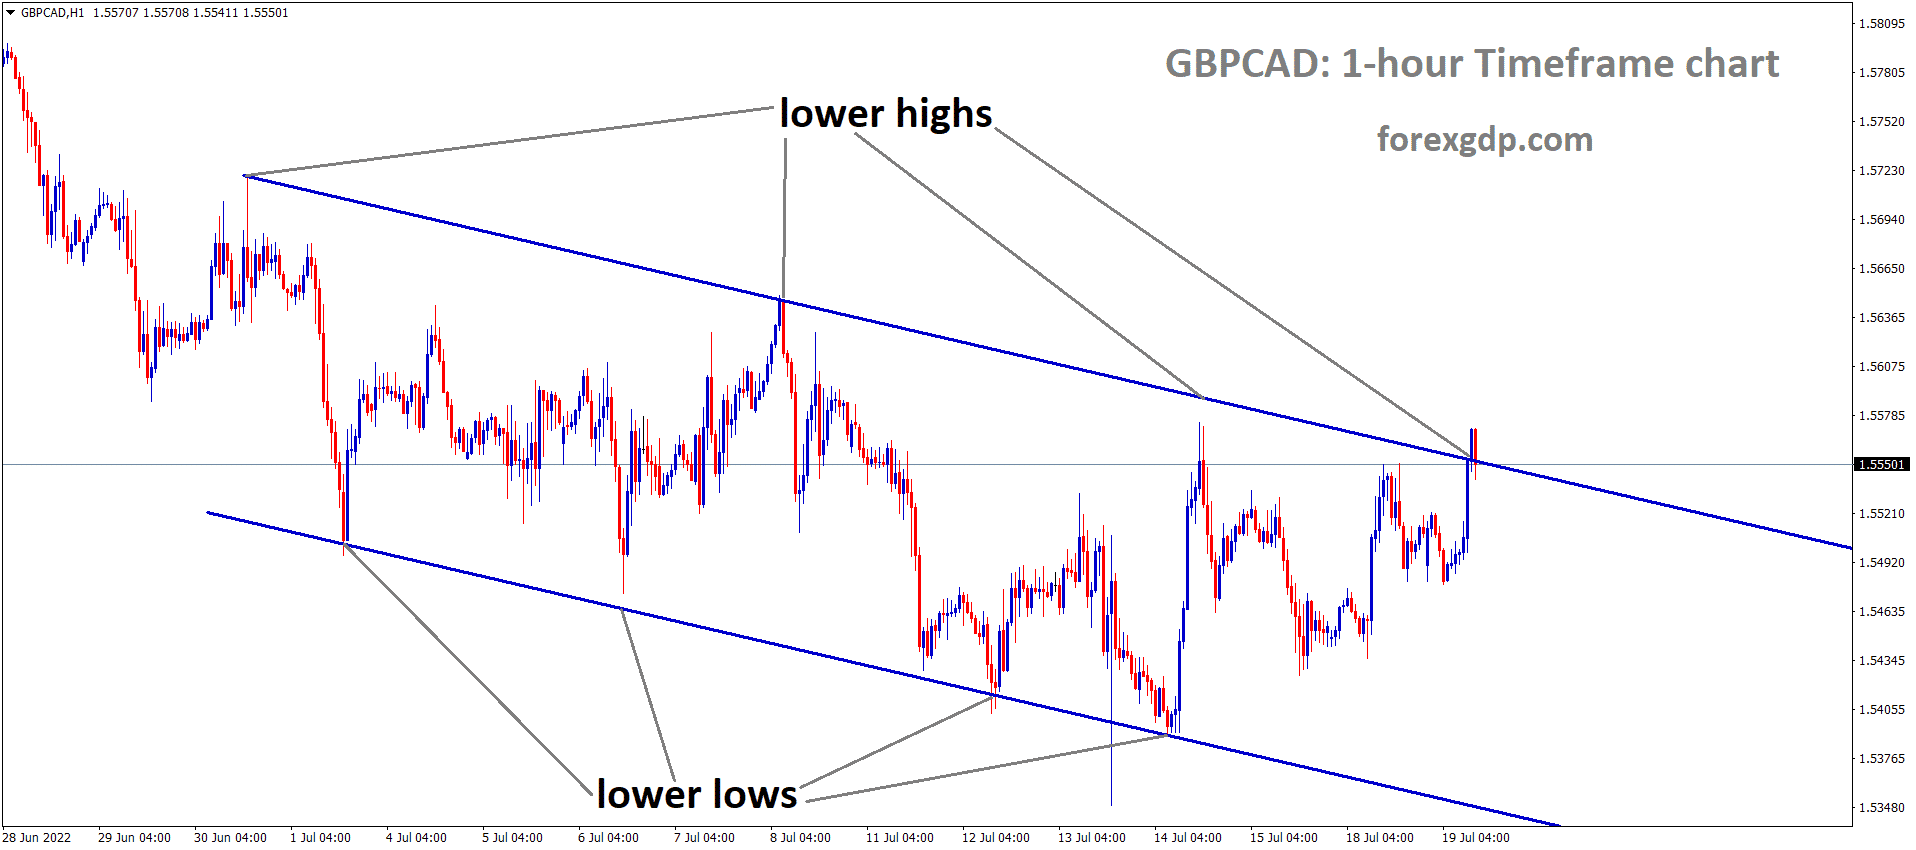 GBPCAD is moving in the Descending channel and the market has reached the Lower high area of the channel